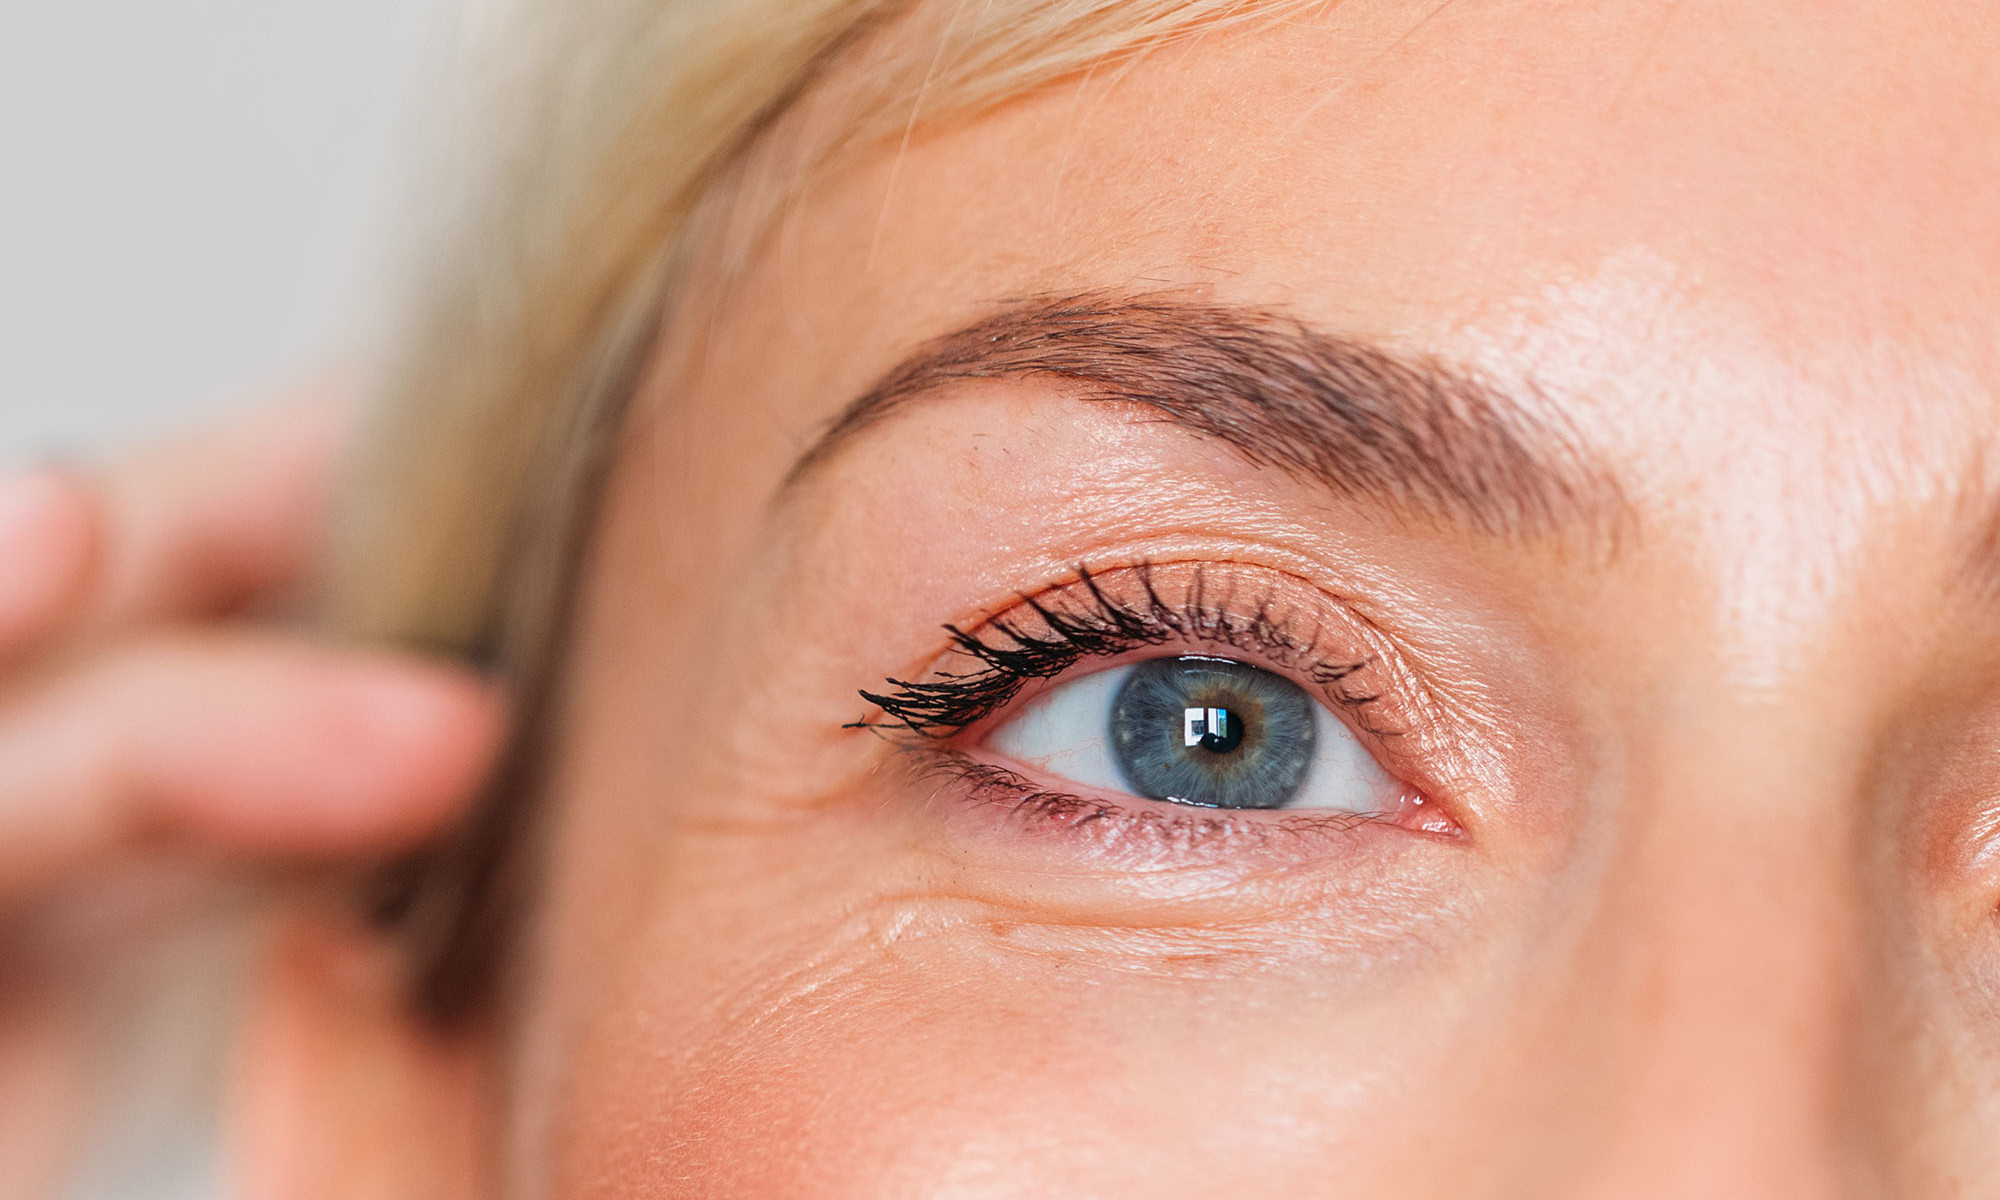 Microblading & Microshading Will Both Give You Fuller Brows — Which Is Better?